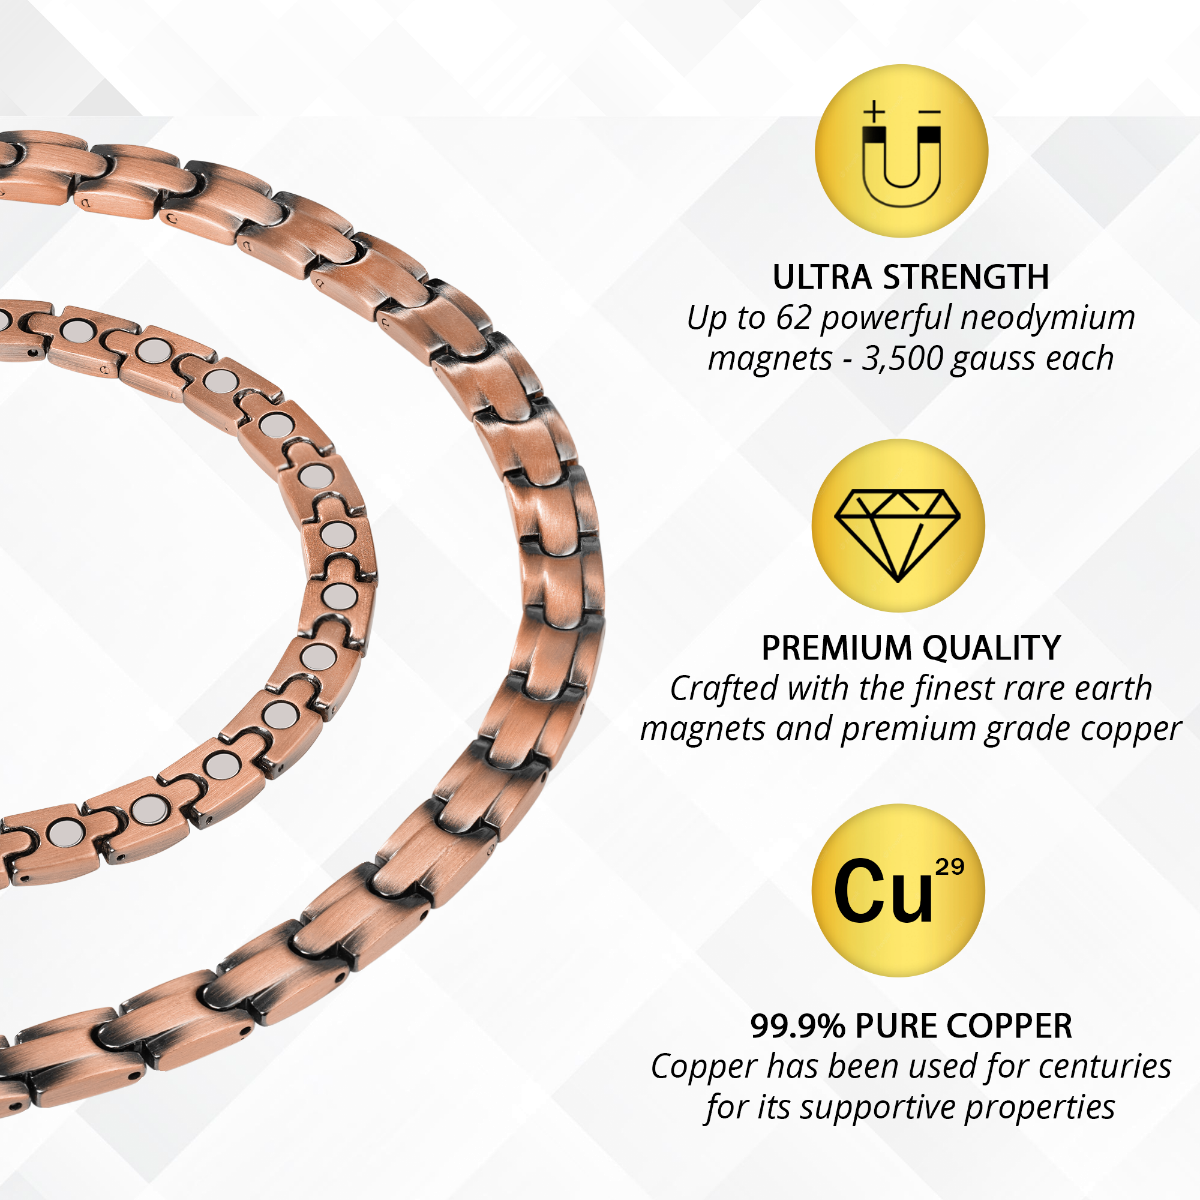  Cigmag Copper Necklace for Men Women - Magnetic Necklace 99%  Solid Pure Copper Ring Set Ultra Strength Magnets - Copper Chain Necklace  with Adjustable Sizing Tool and Gifts Box for Anniversary 